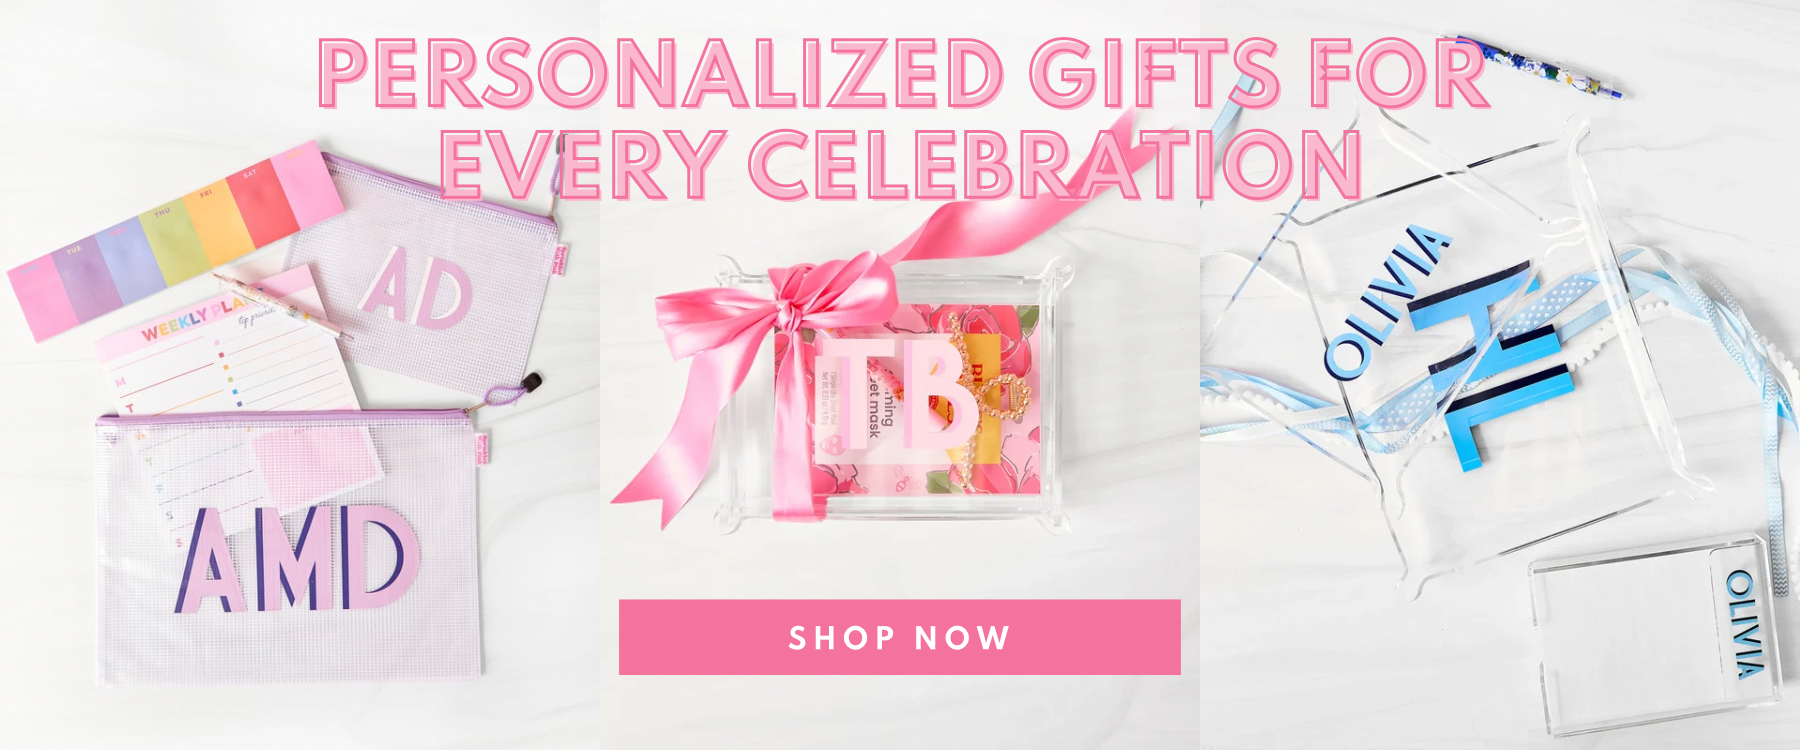 Clear pouches with initials on front in pink and blue coloring on image that reads "personalized gifts for every celebration"